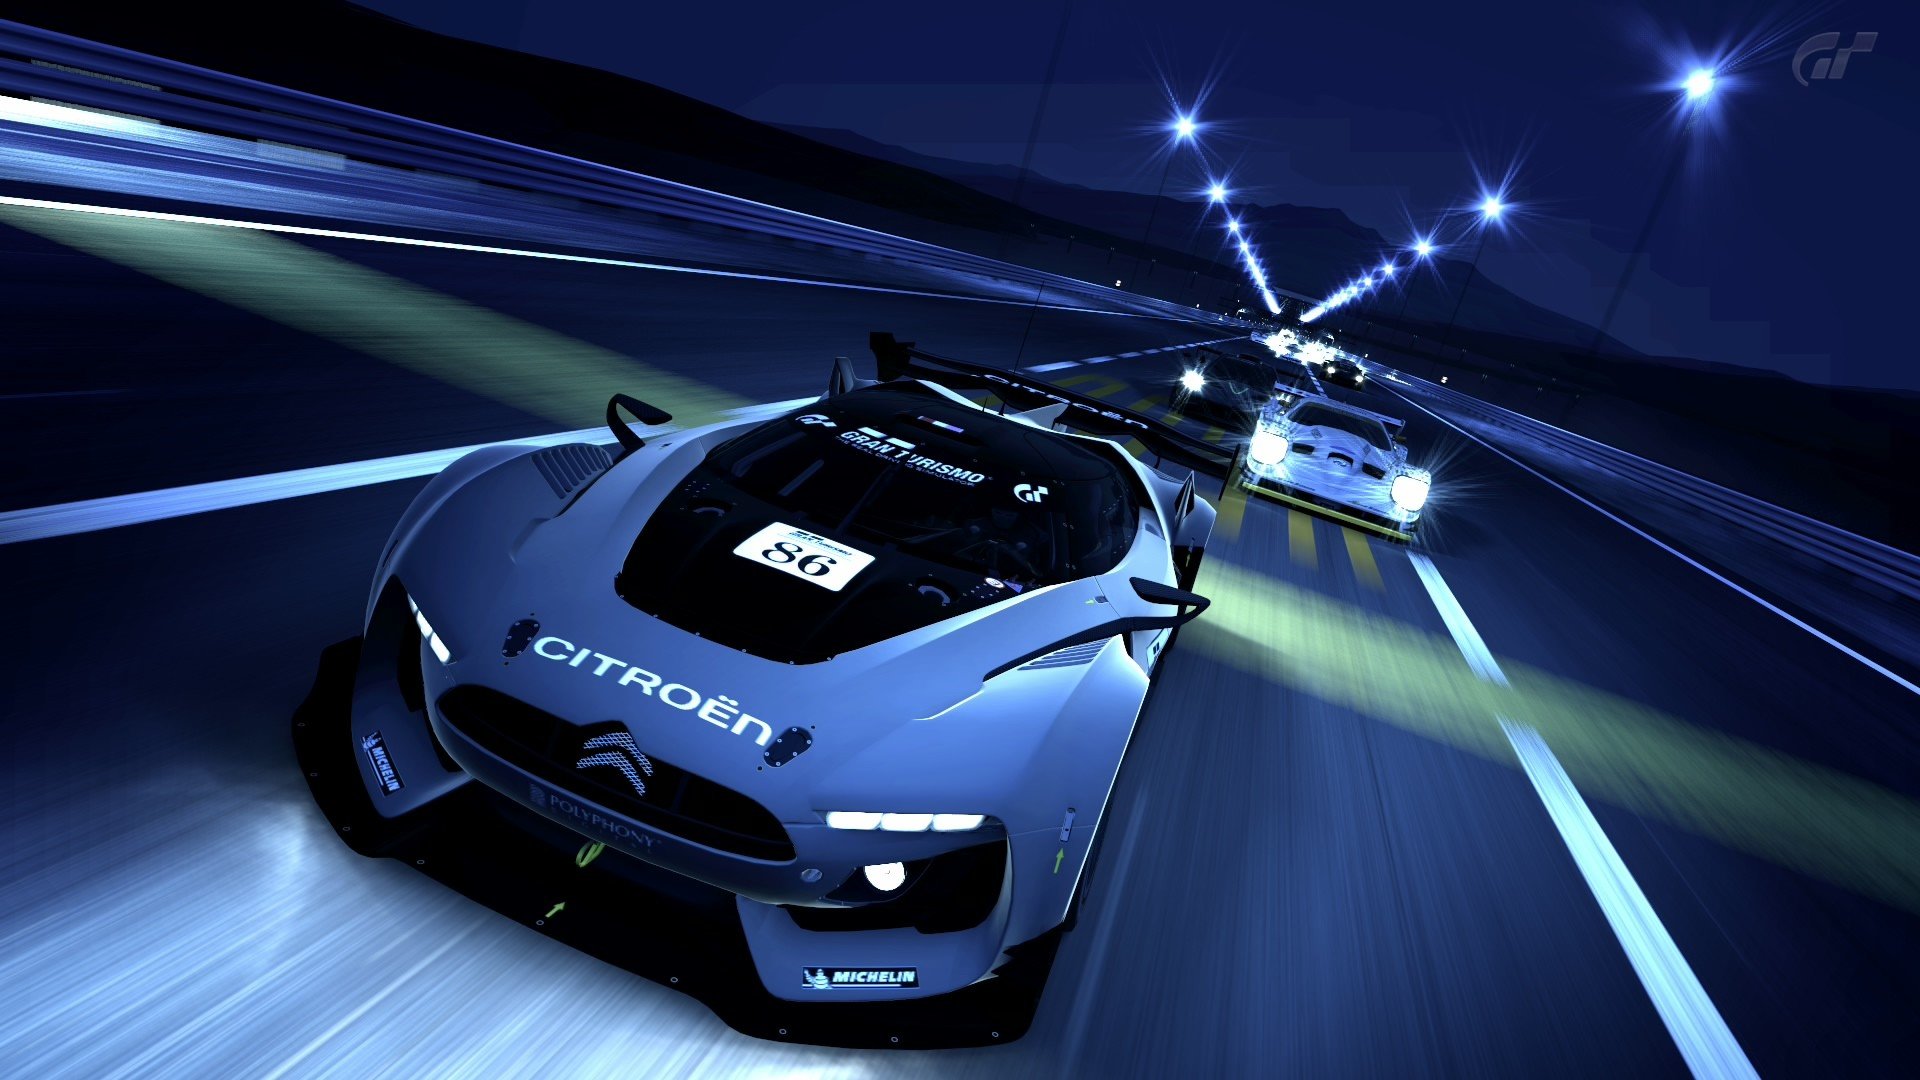 video, Games, Cars, Vehicles, Gran, Turismo, 5, Playstation, 3, Gt, By, Citroaia Wallpaper